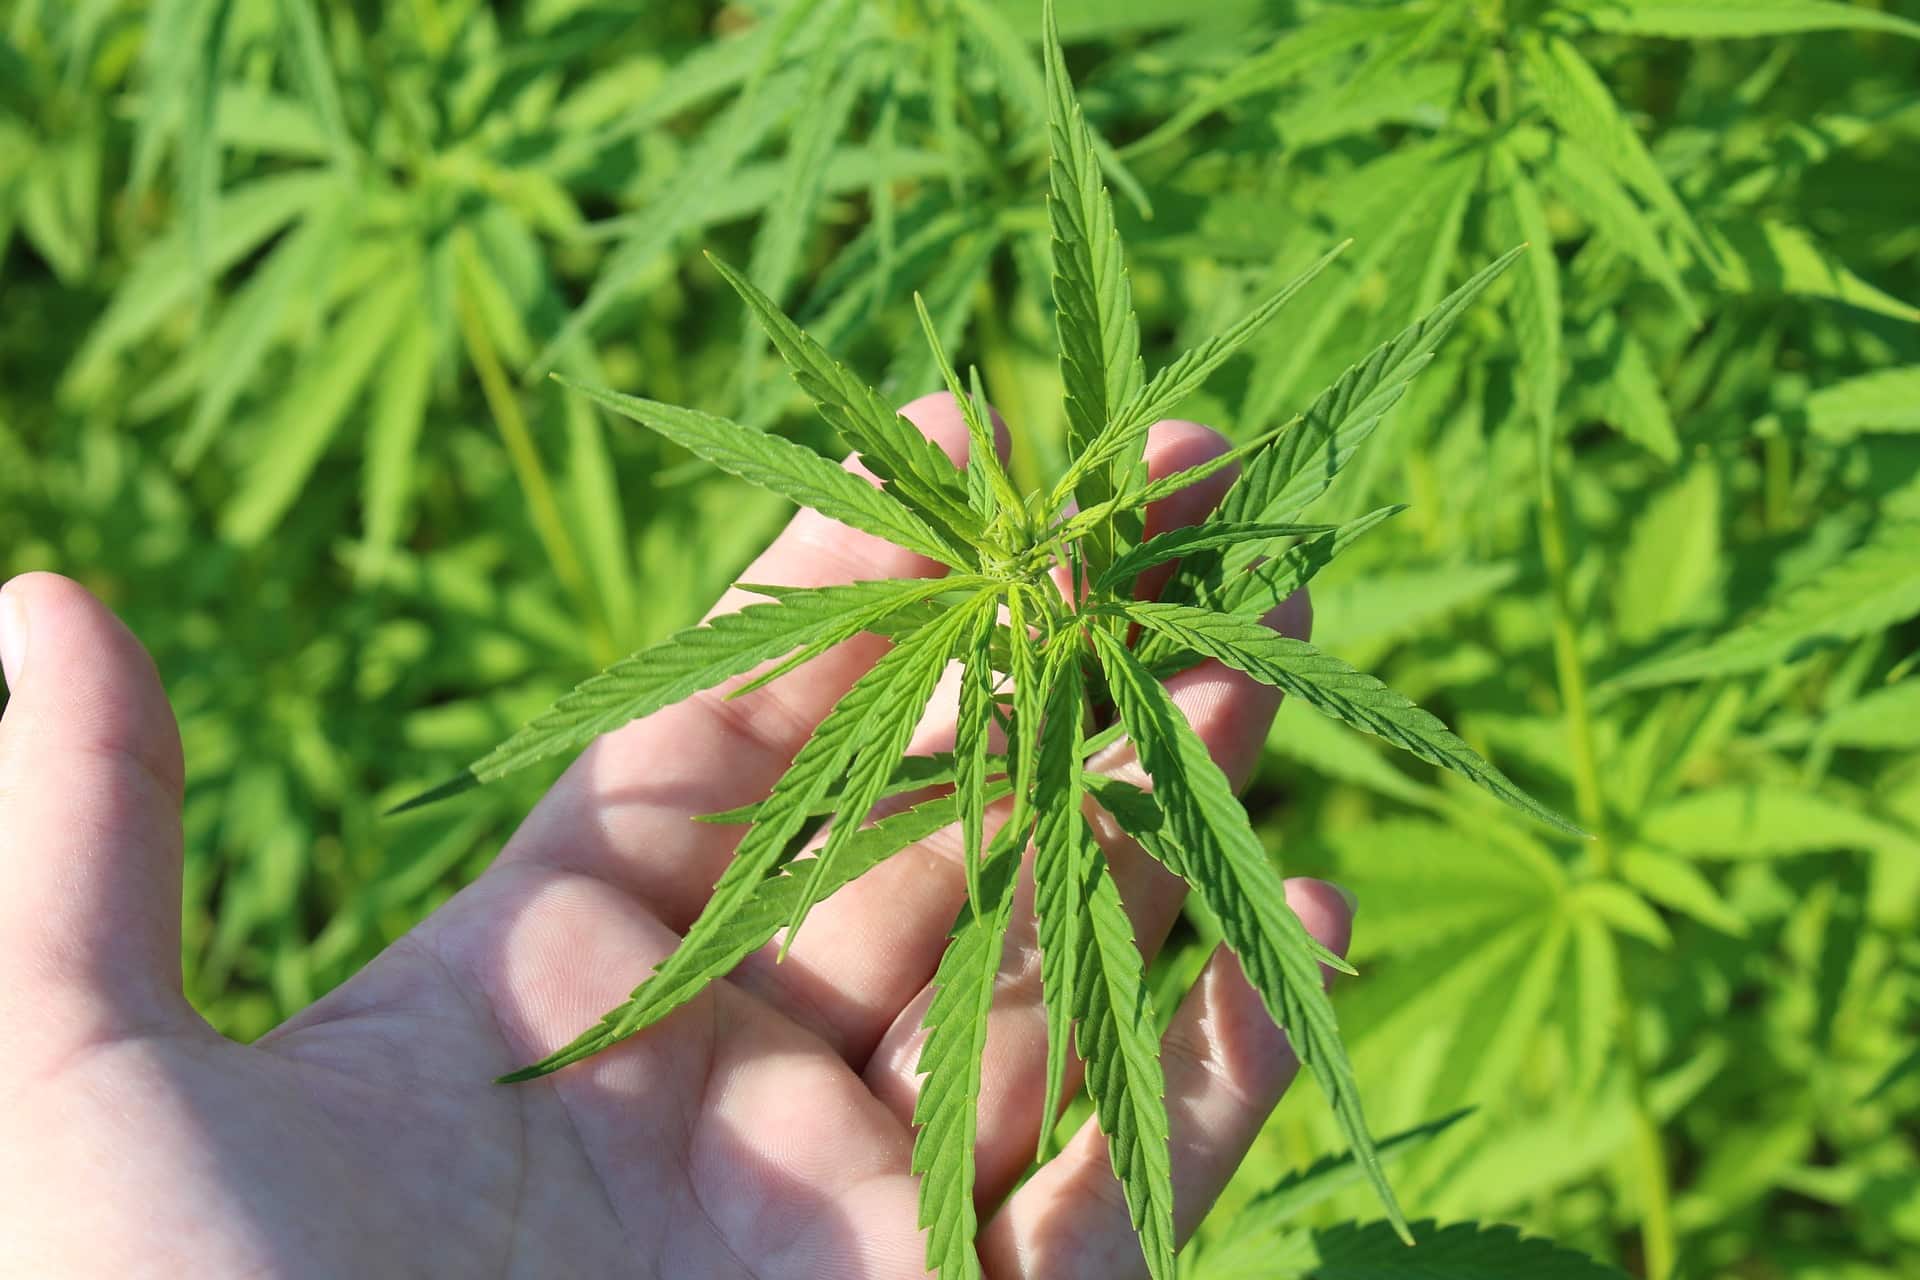 Hemp and Green Building This News Shows the Potential of Hemp in the Construction Sector